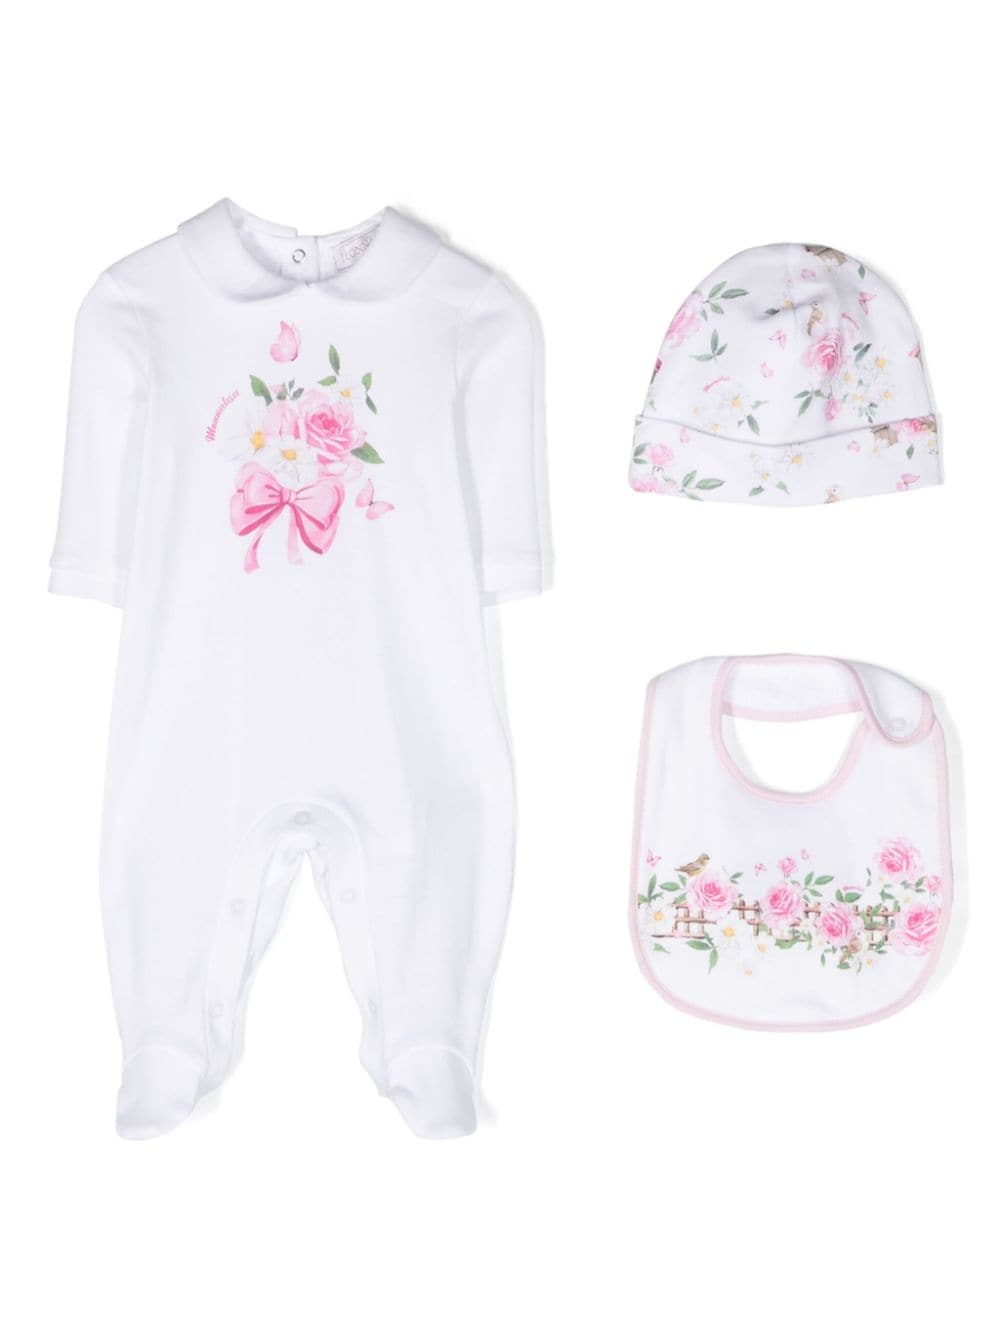 White baby girl onesie with print